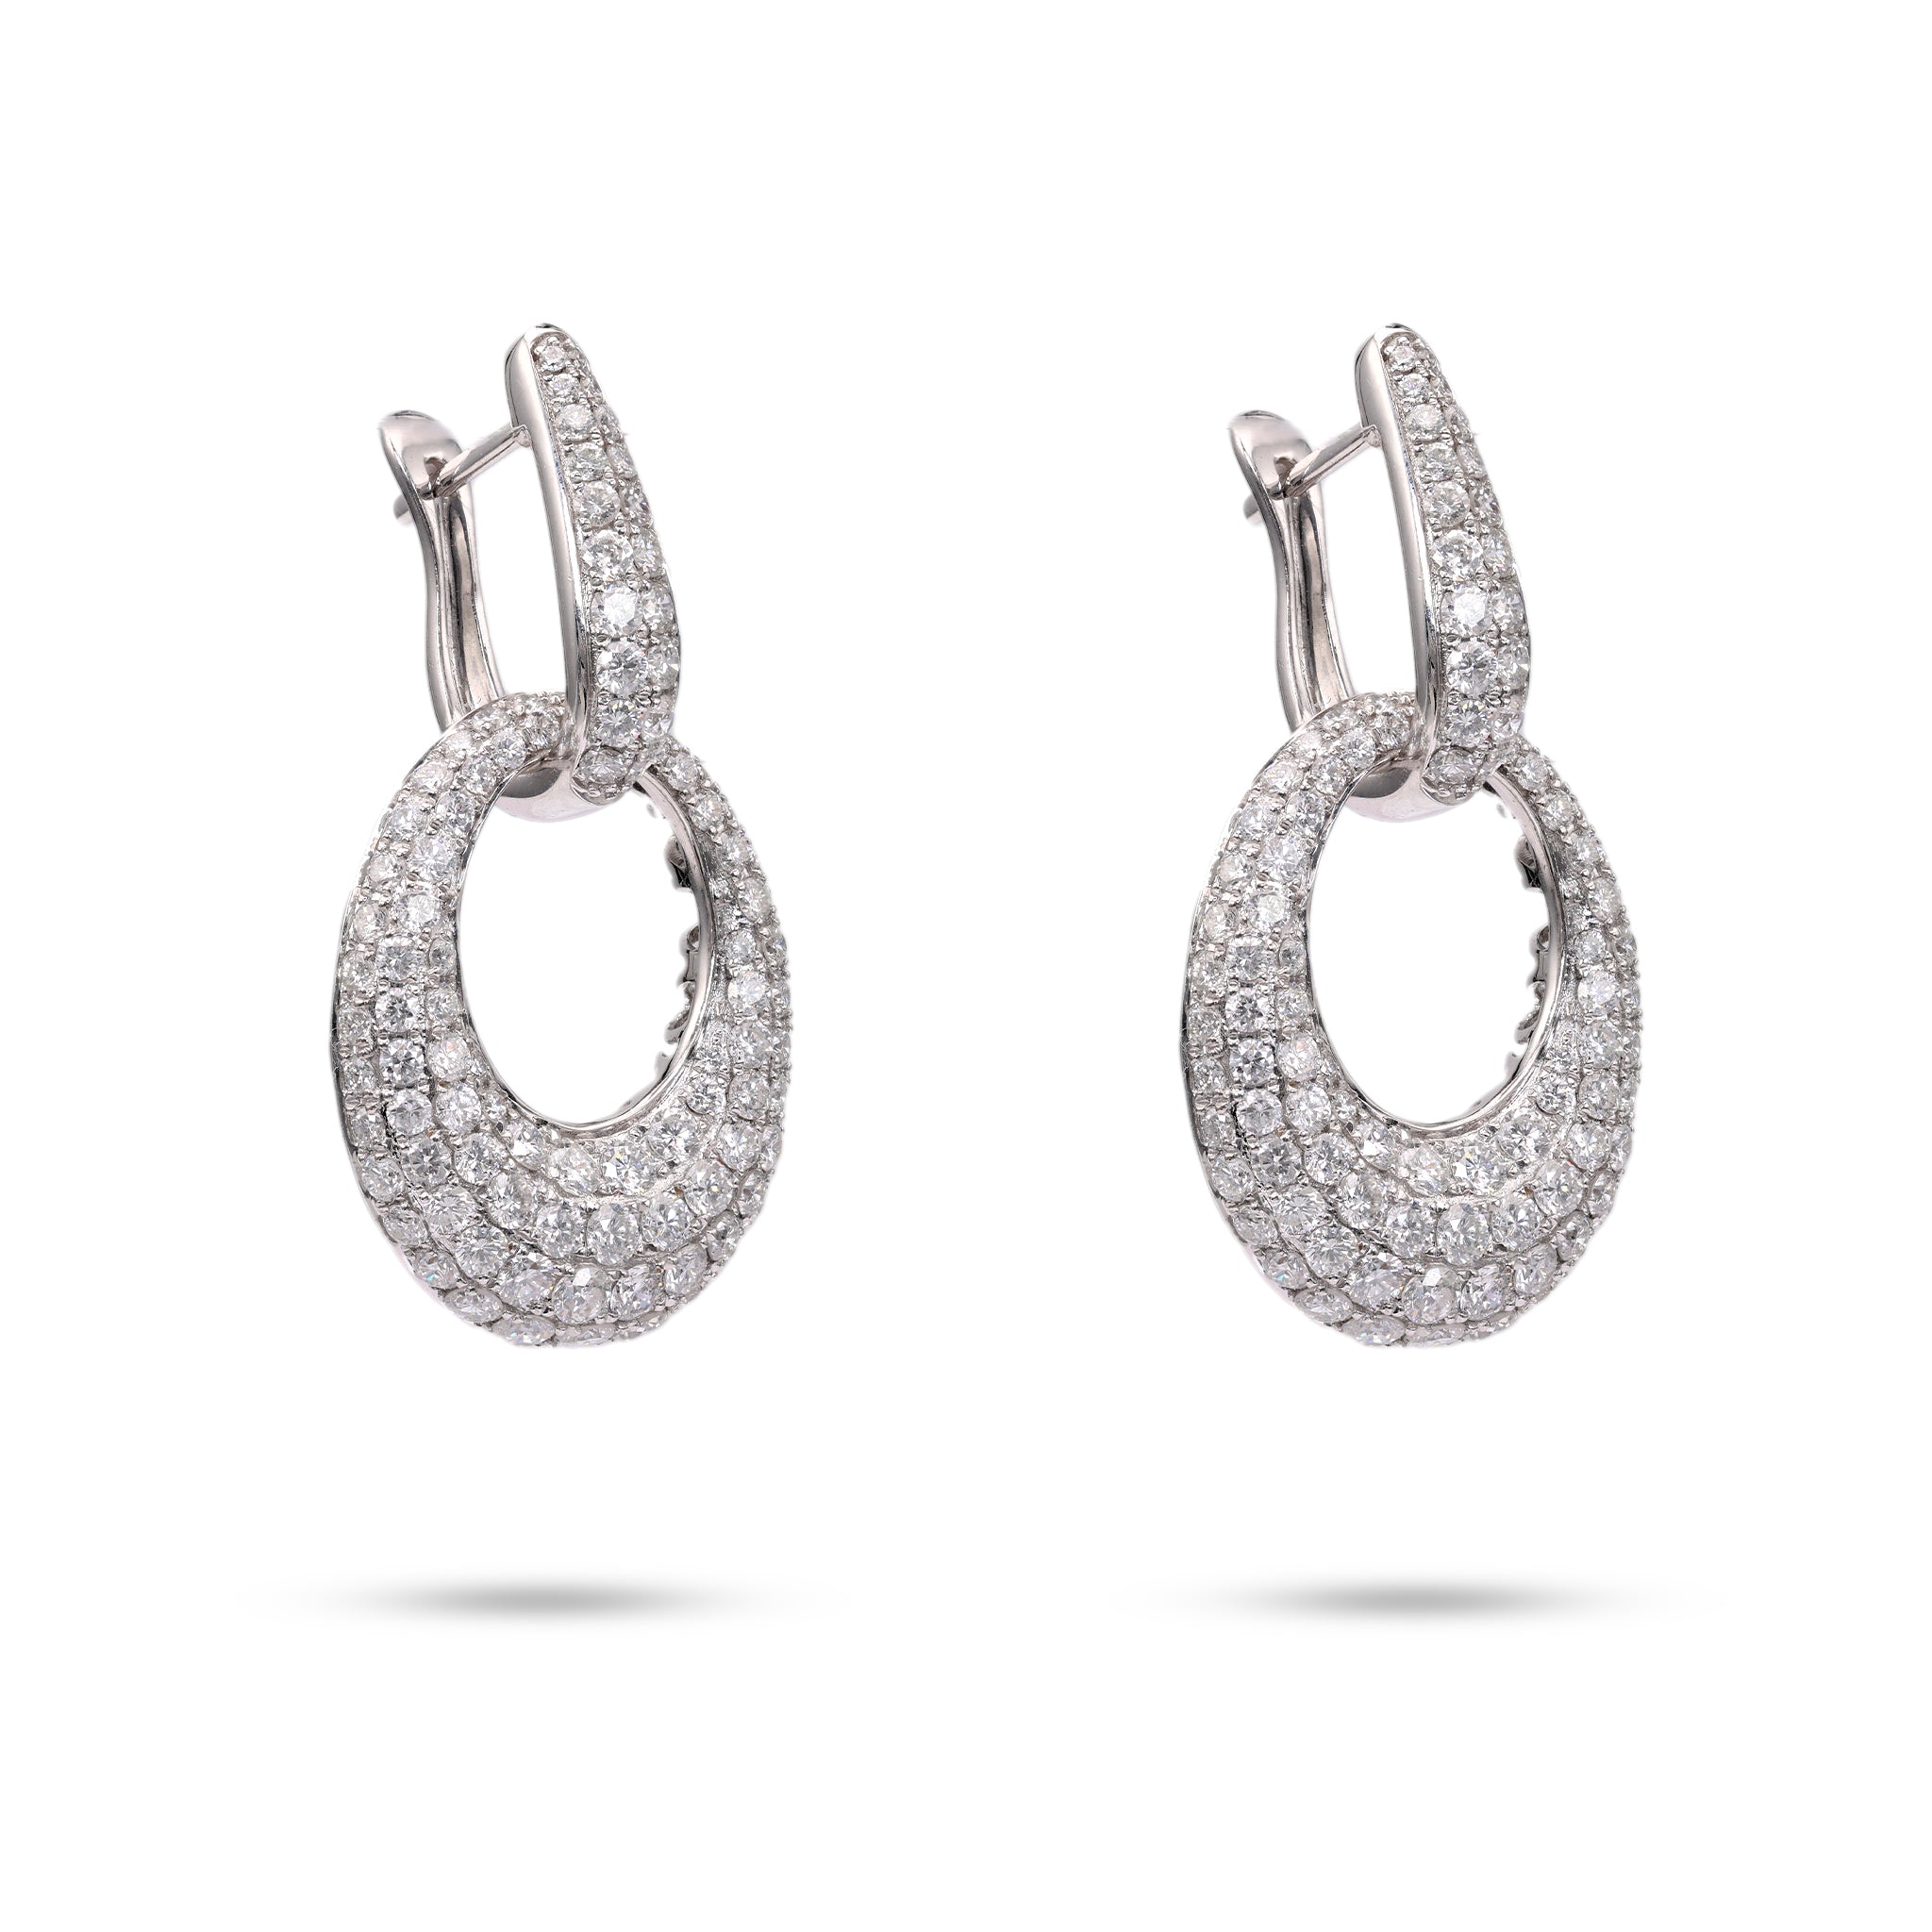 4.99 Carat Total Weight Diamond 18k White Gold Day to Night Earrings Earrings Jack Weir & Sons   